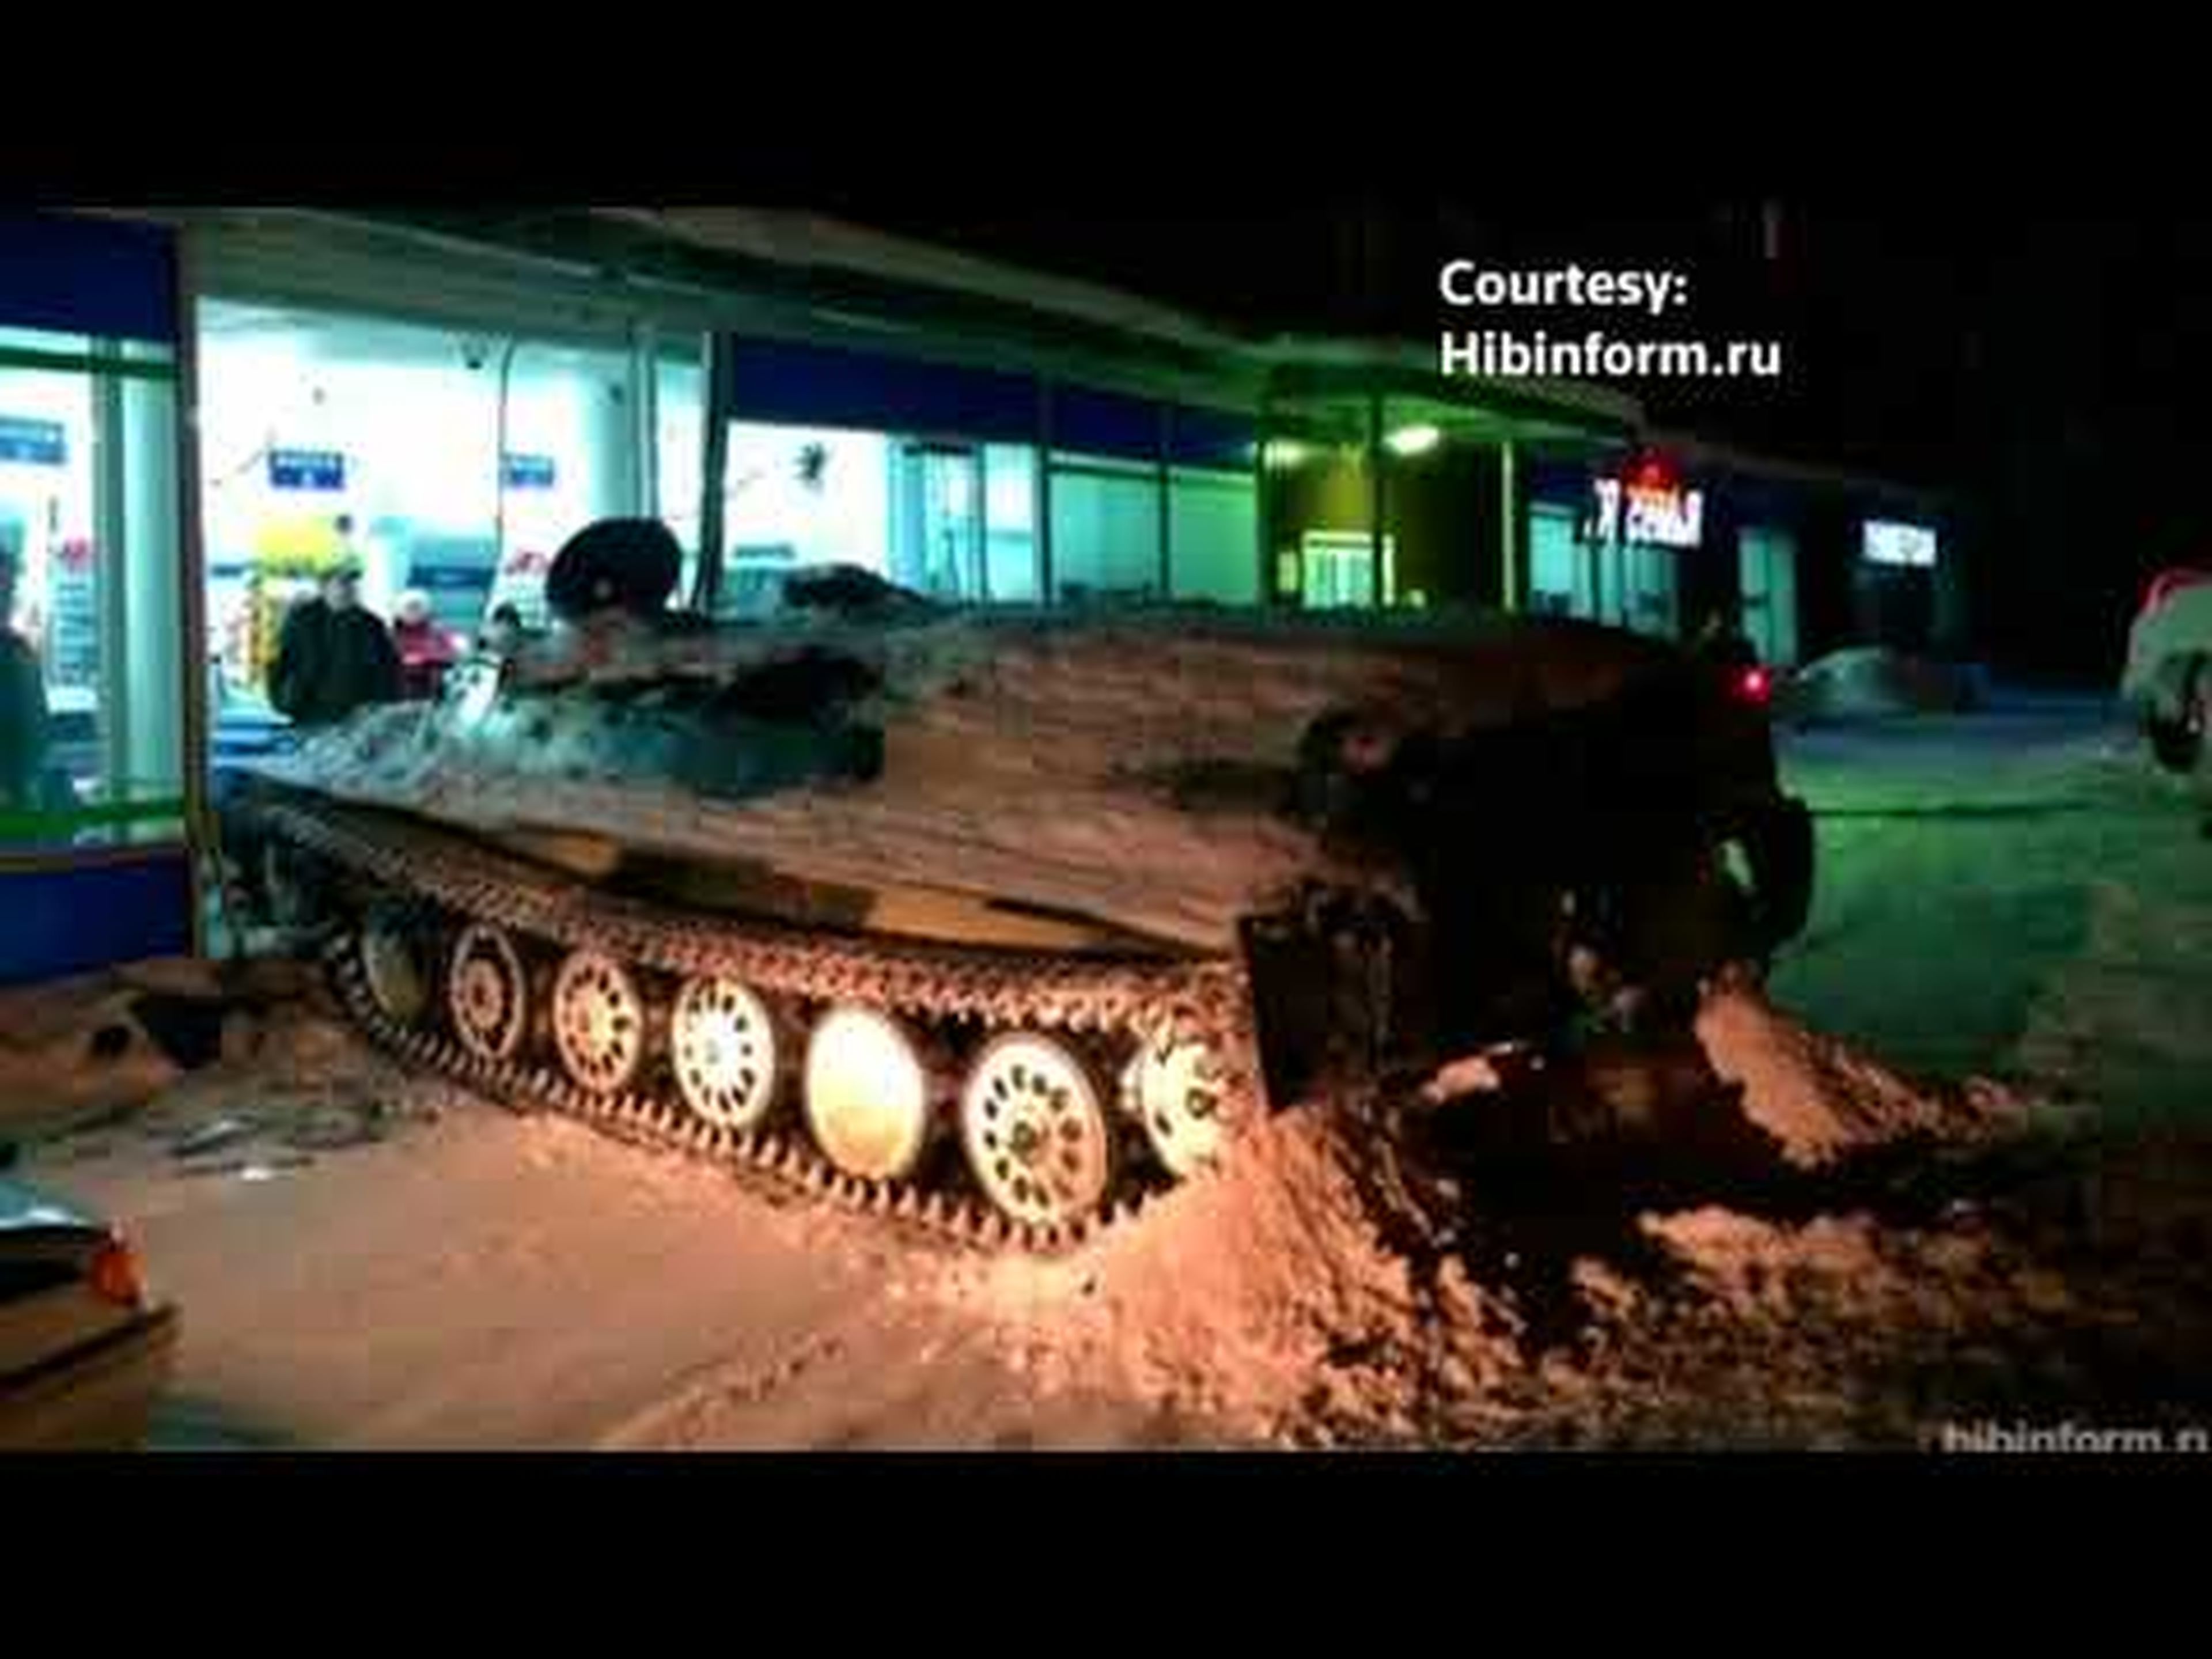 Drunk Russian Man Rams Armored Personnel Carrier into Shop, Steals Wine [Caught on Cam]